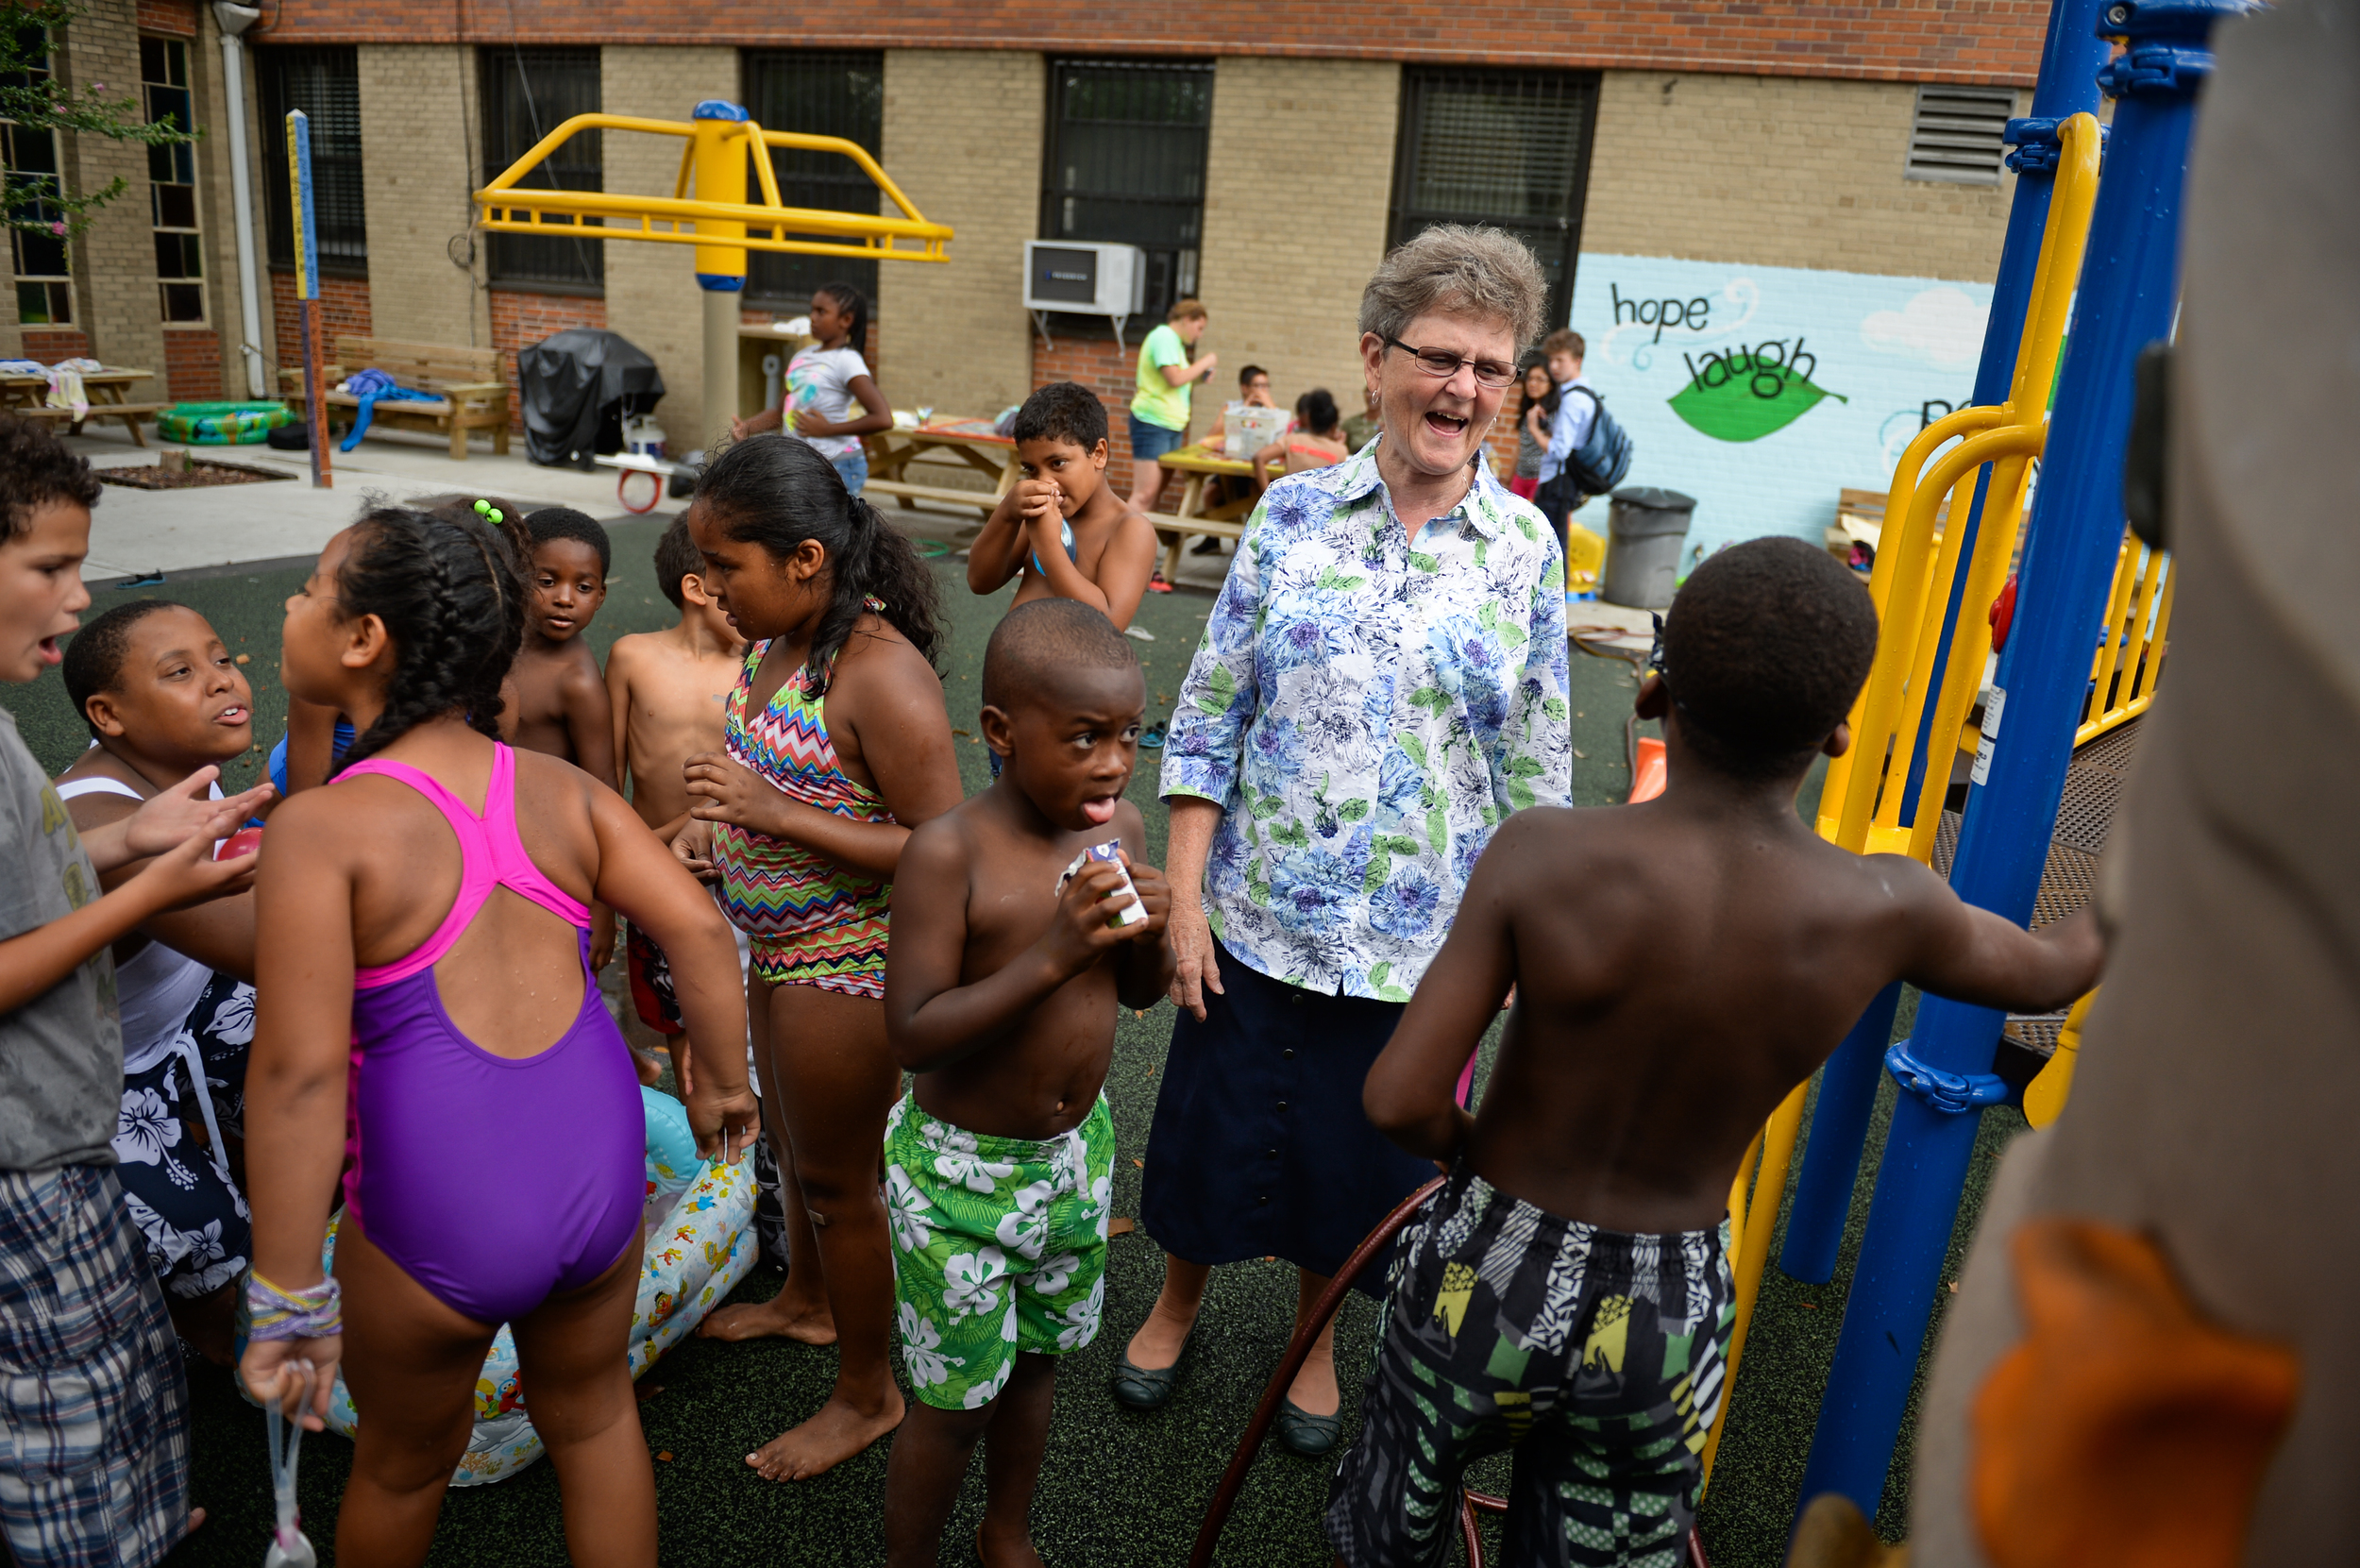 Sister Tesa with children at the Hour Summer Camp and After School Program in Long Island City.